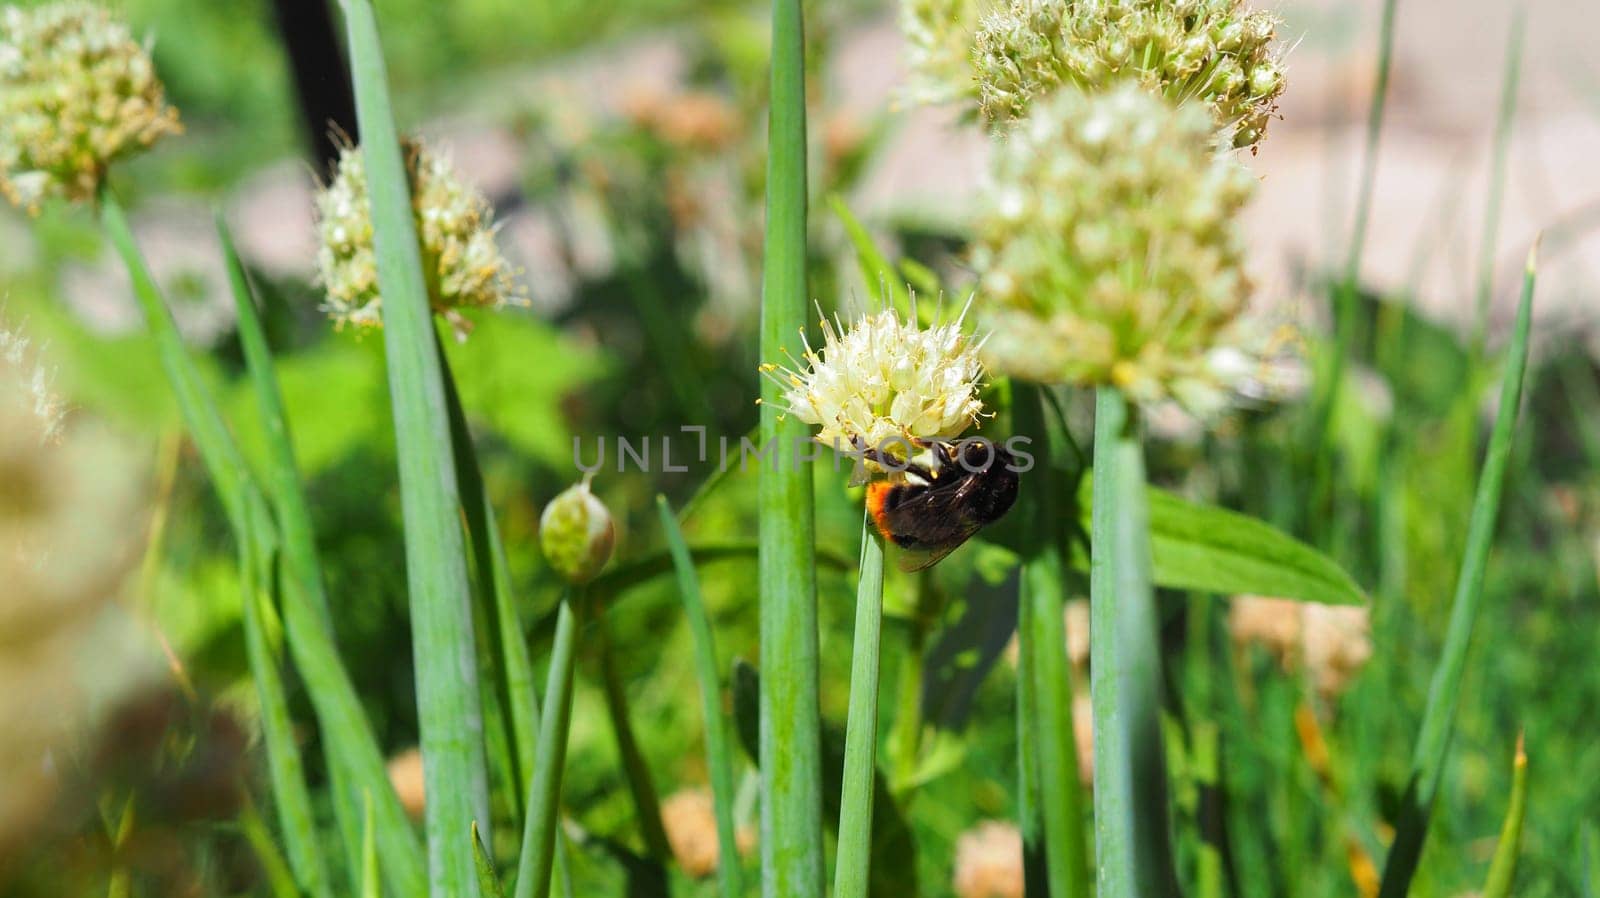 Natural vegetable green background.Flowering onion, growing onion seeds for planting next year.Vegetable growing concept. Agricultural. by TatianaPink